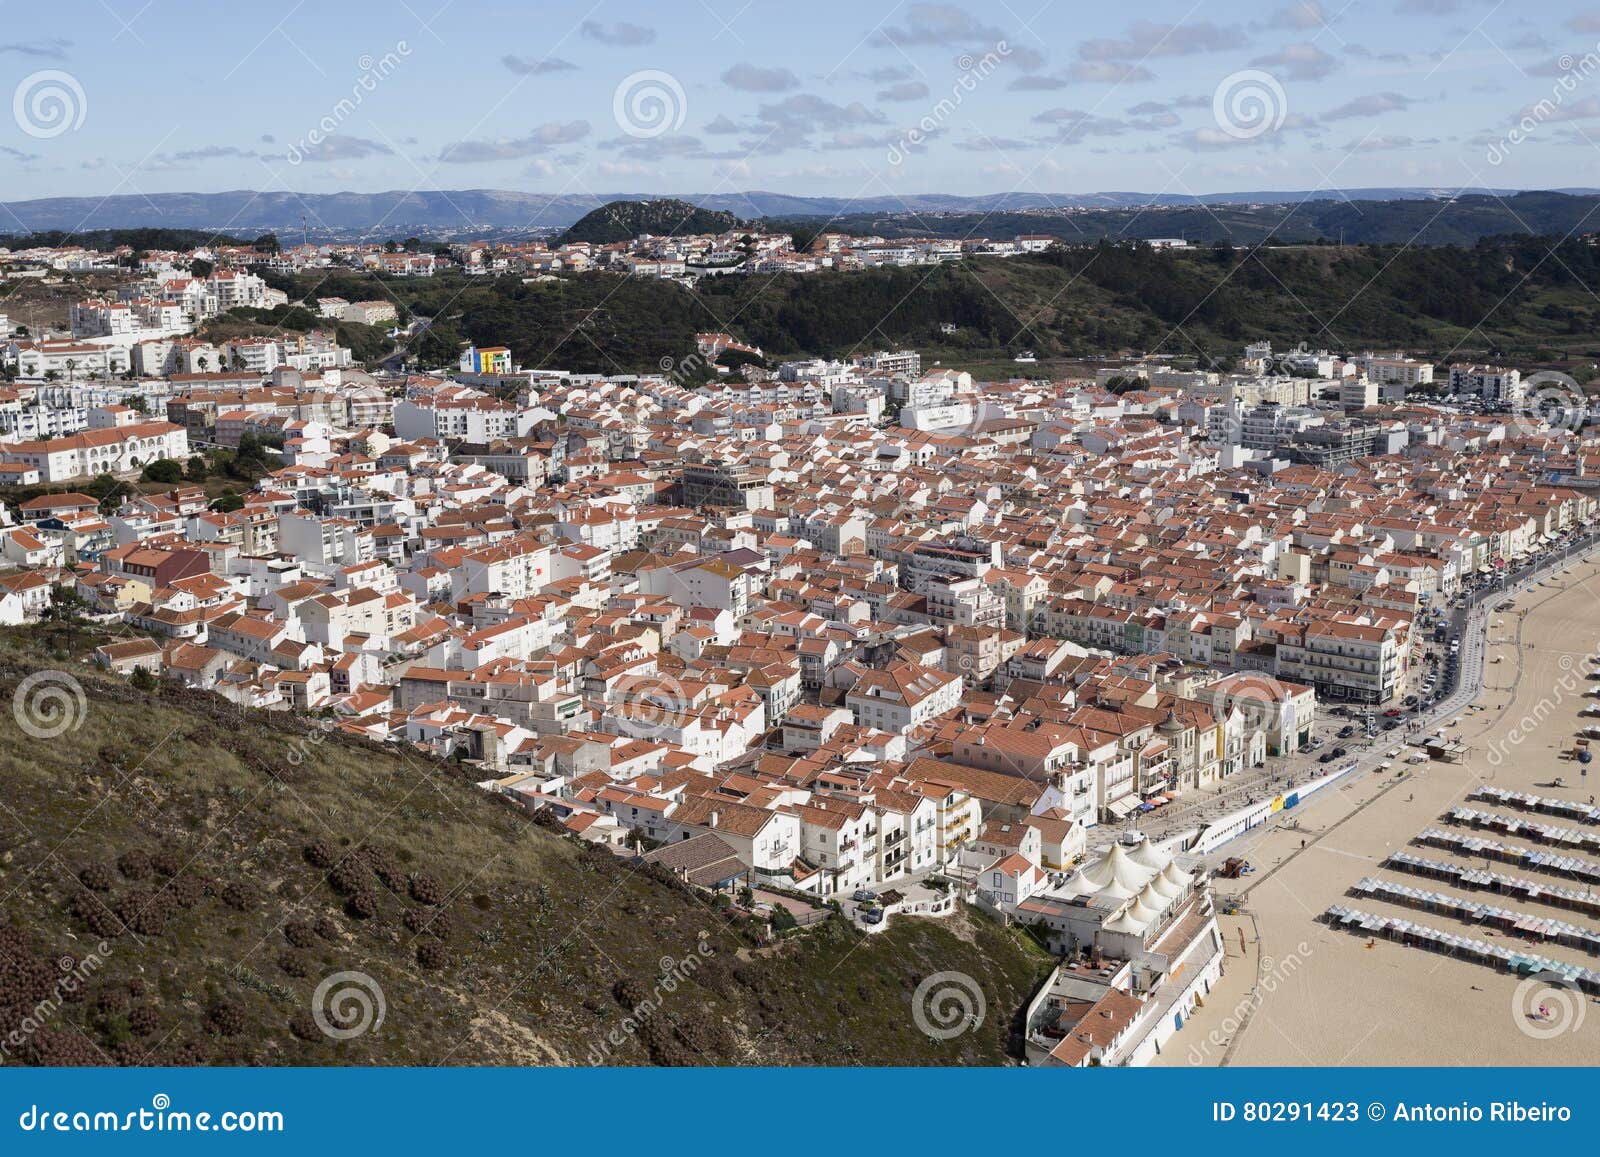 village of nazare seen from the sitio